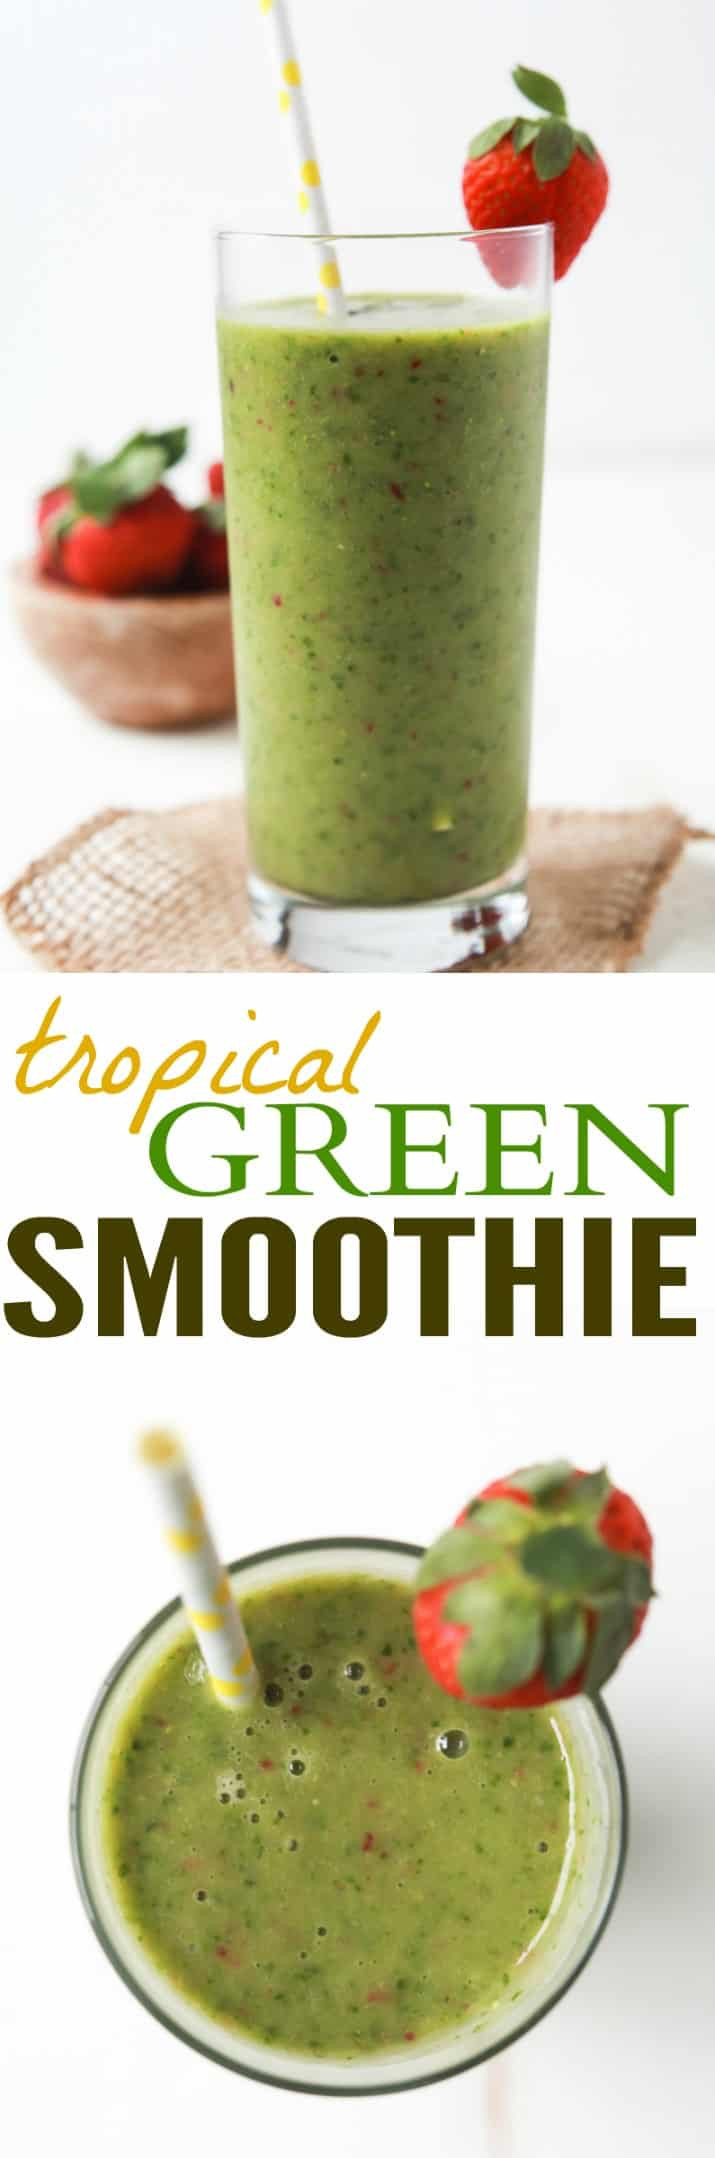 Tropical Smoothie Smoothies
 Tropical Green Smoothie